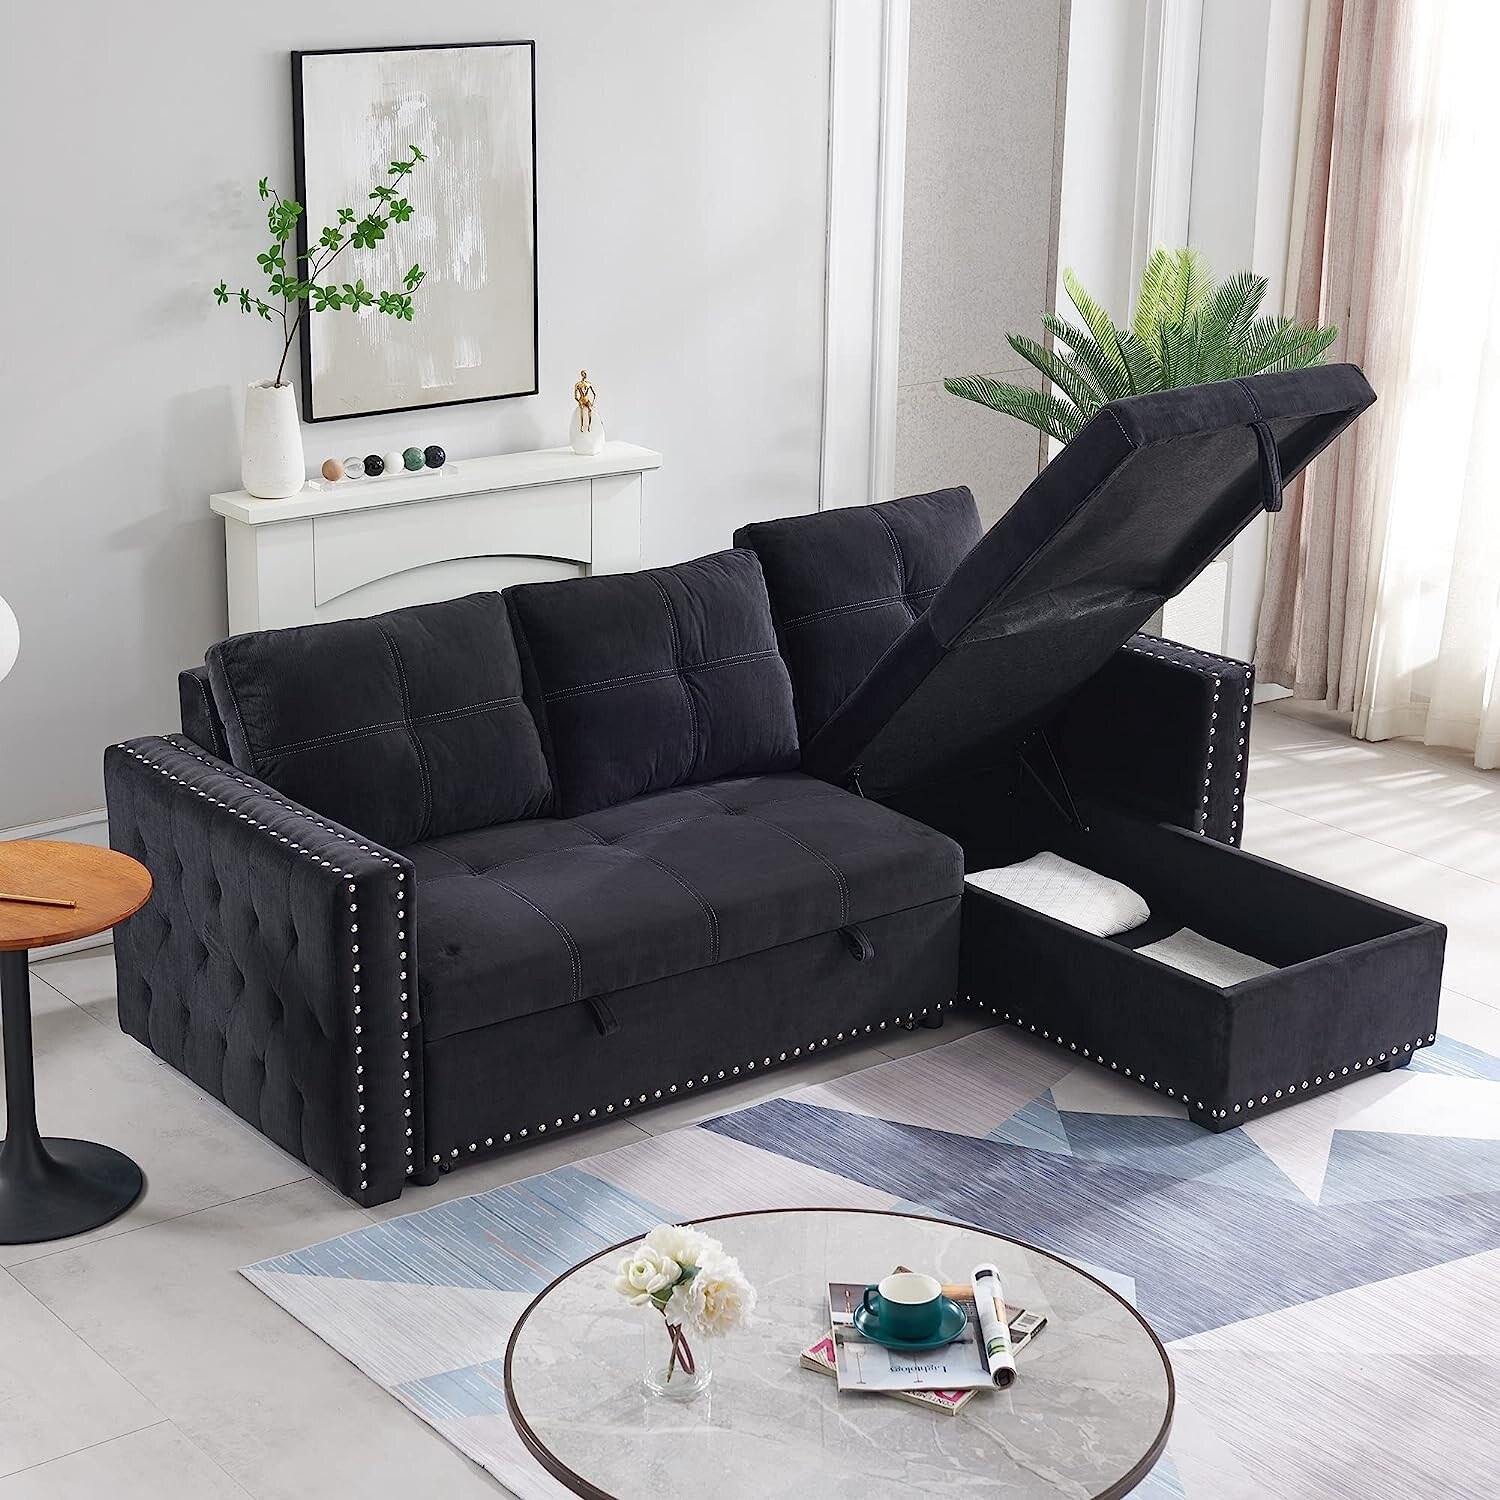 Elegant Style Sectional Sofa With Pulled Out Bed and Storage Reversible Chaise  Copper Nail Inlayed Arms For Living Room  Black